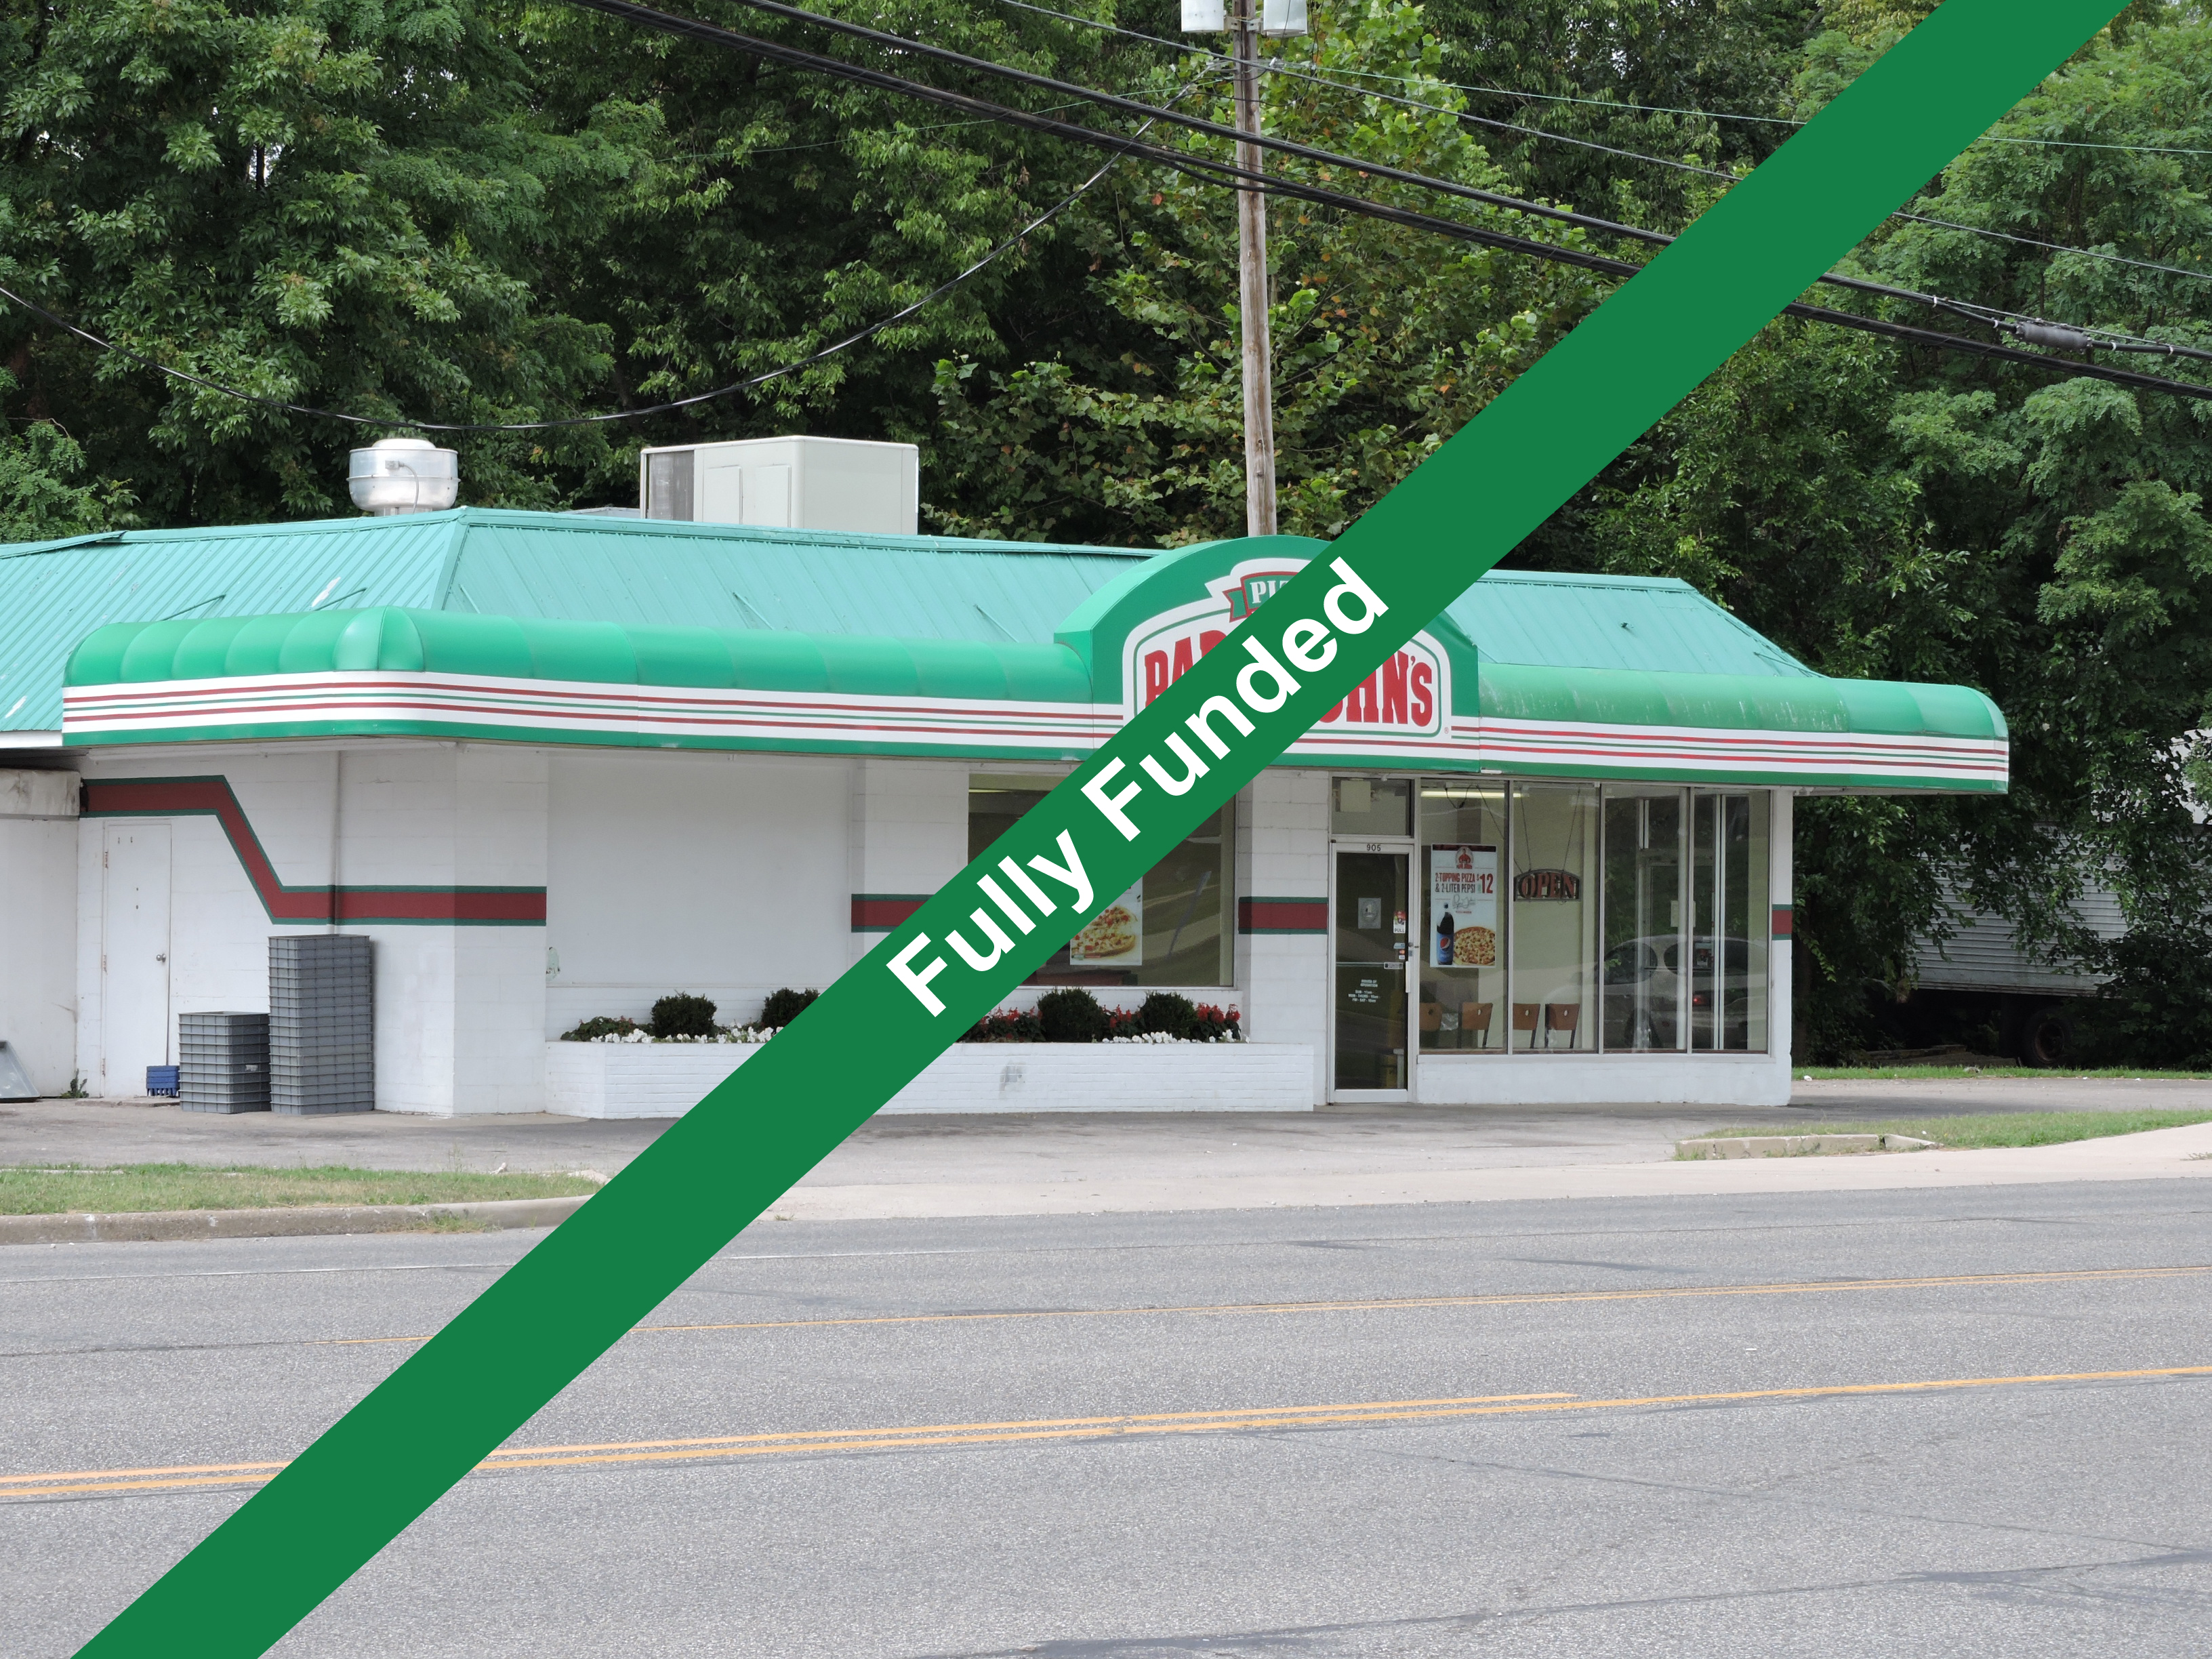 Papa John's | Crowdfunding Real Estate in N. Vernon-Fully Funded